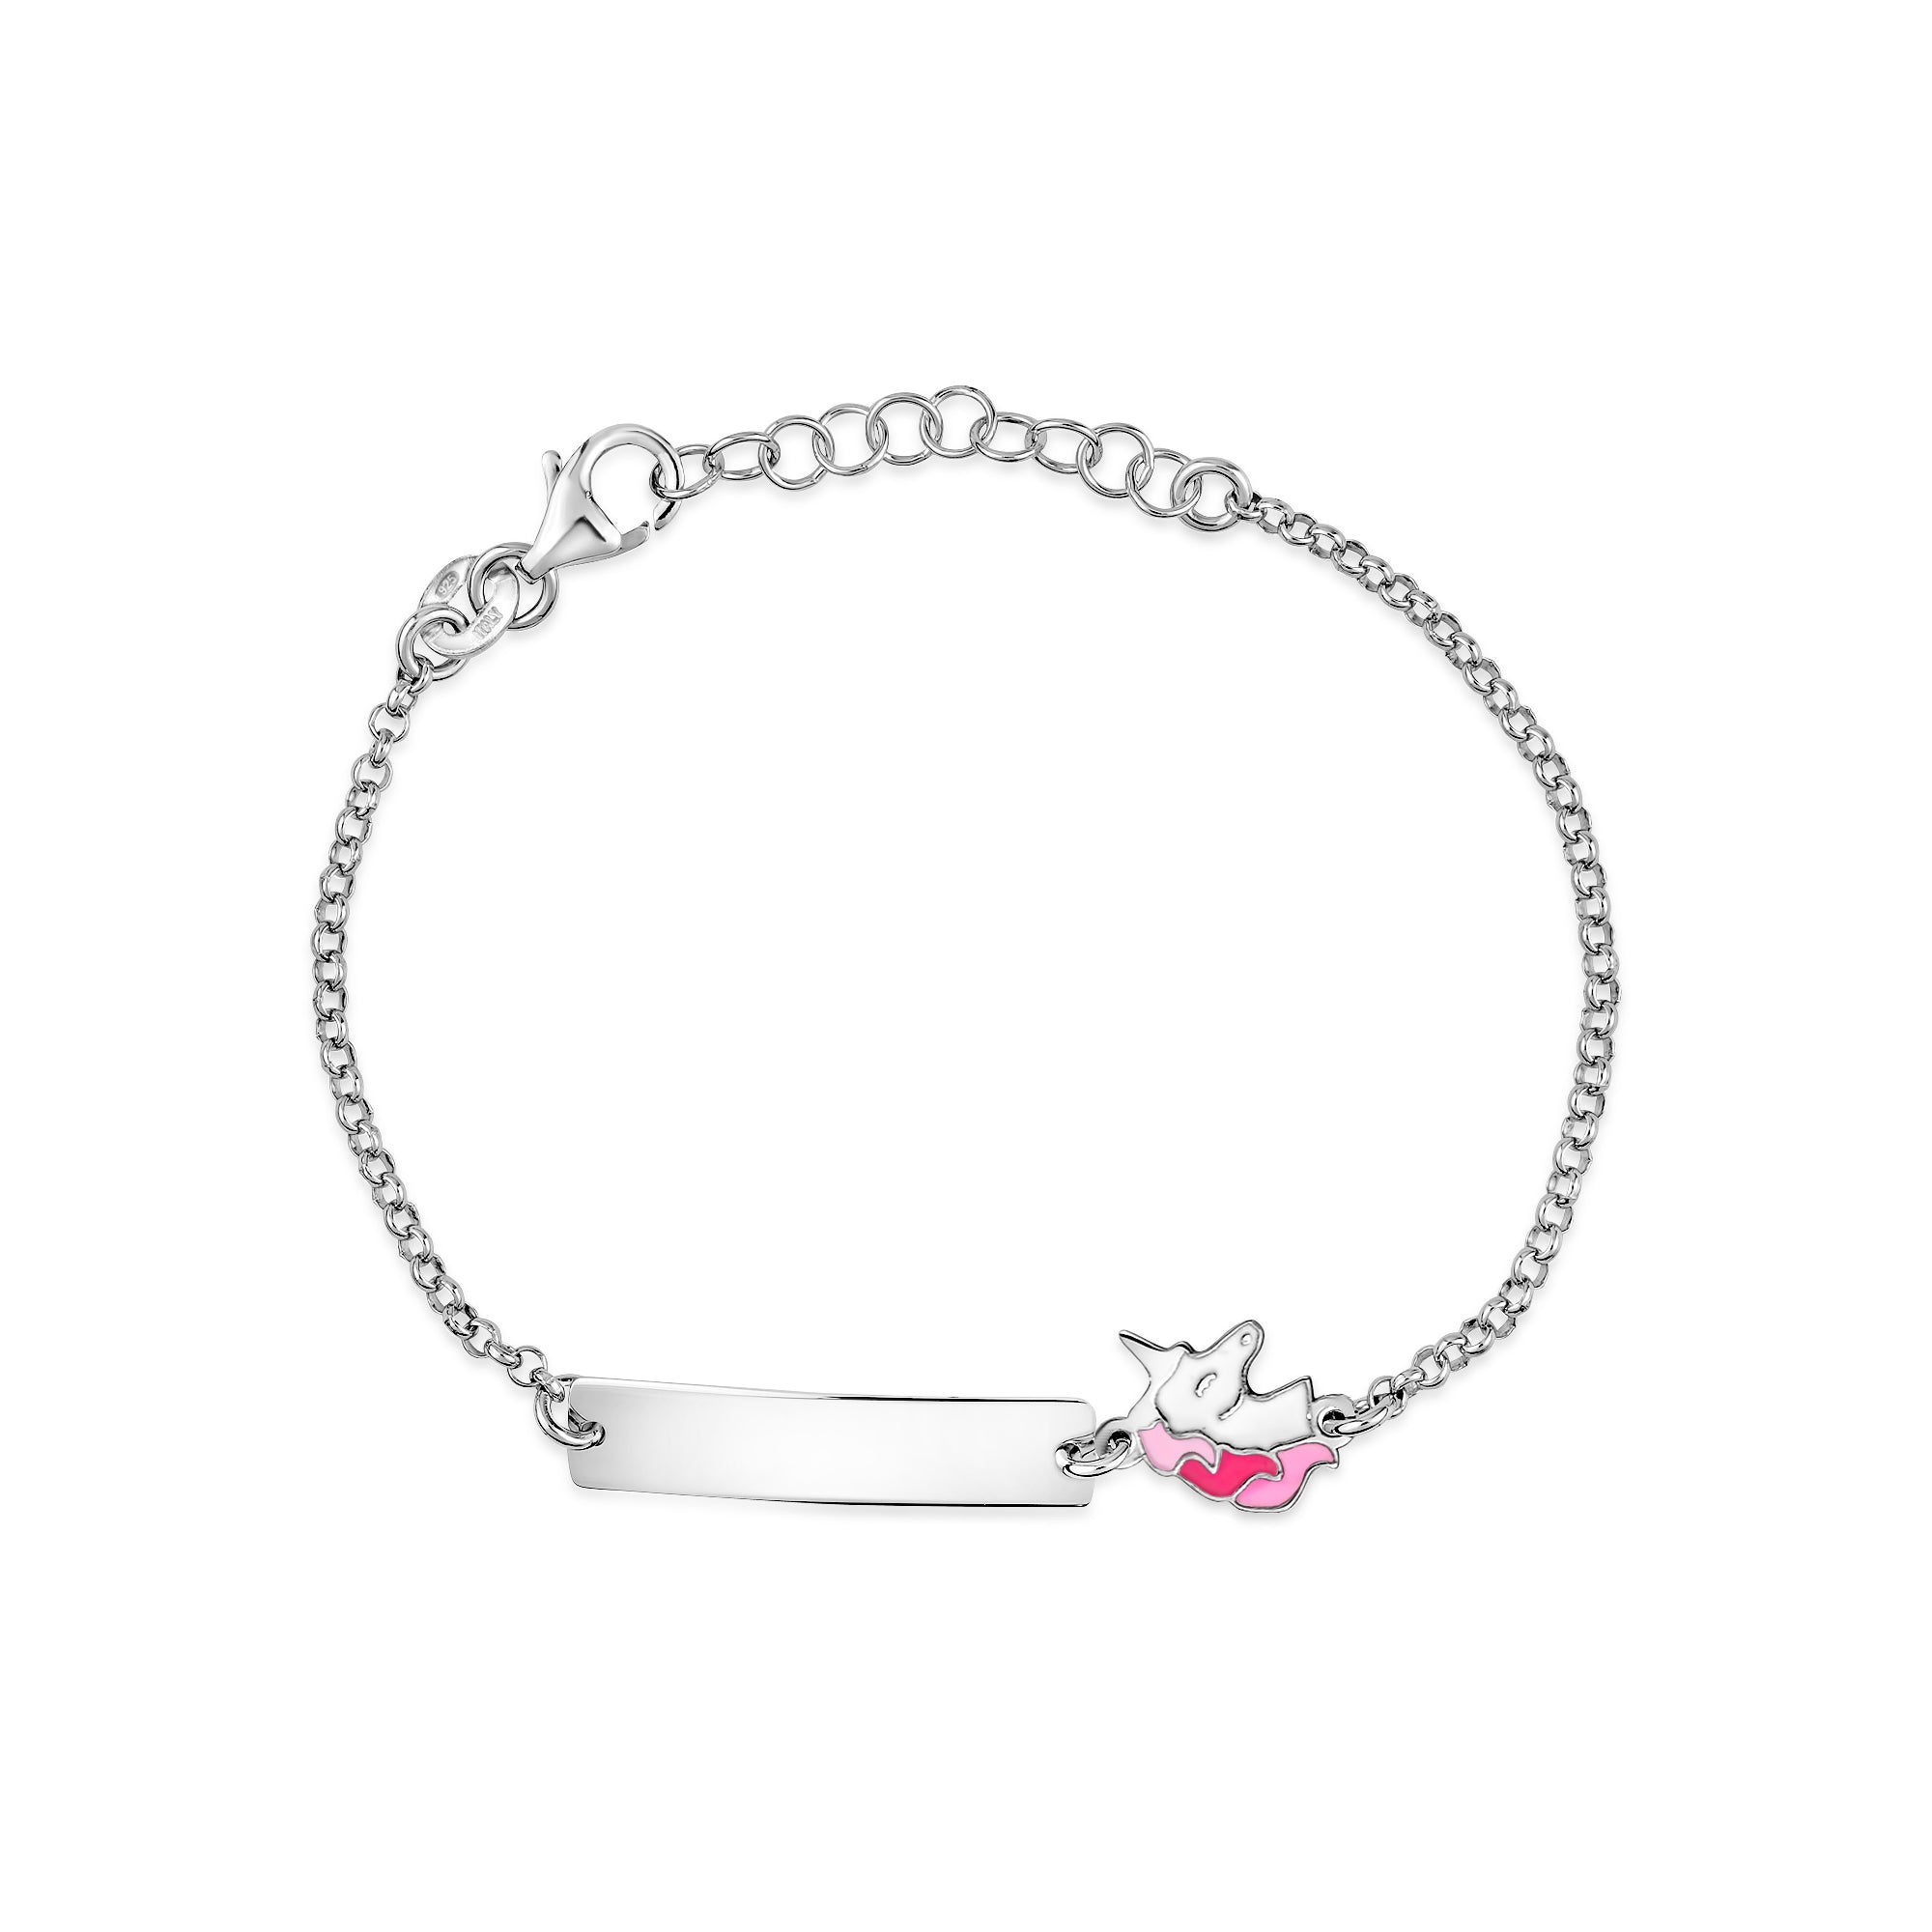 UNICORNJ Sterling Silver 925 Engravable ID Bracelet Rolo Chain for Girls Boys with Enamel 6.5"